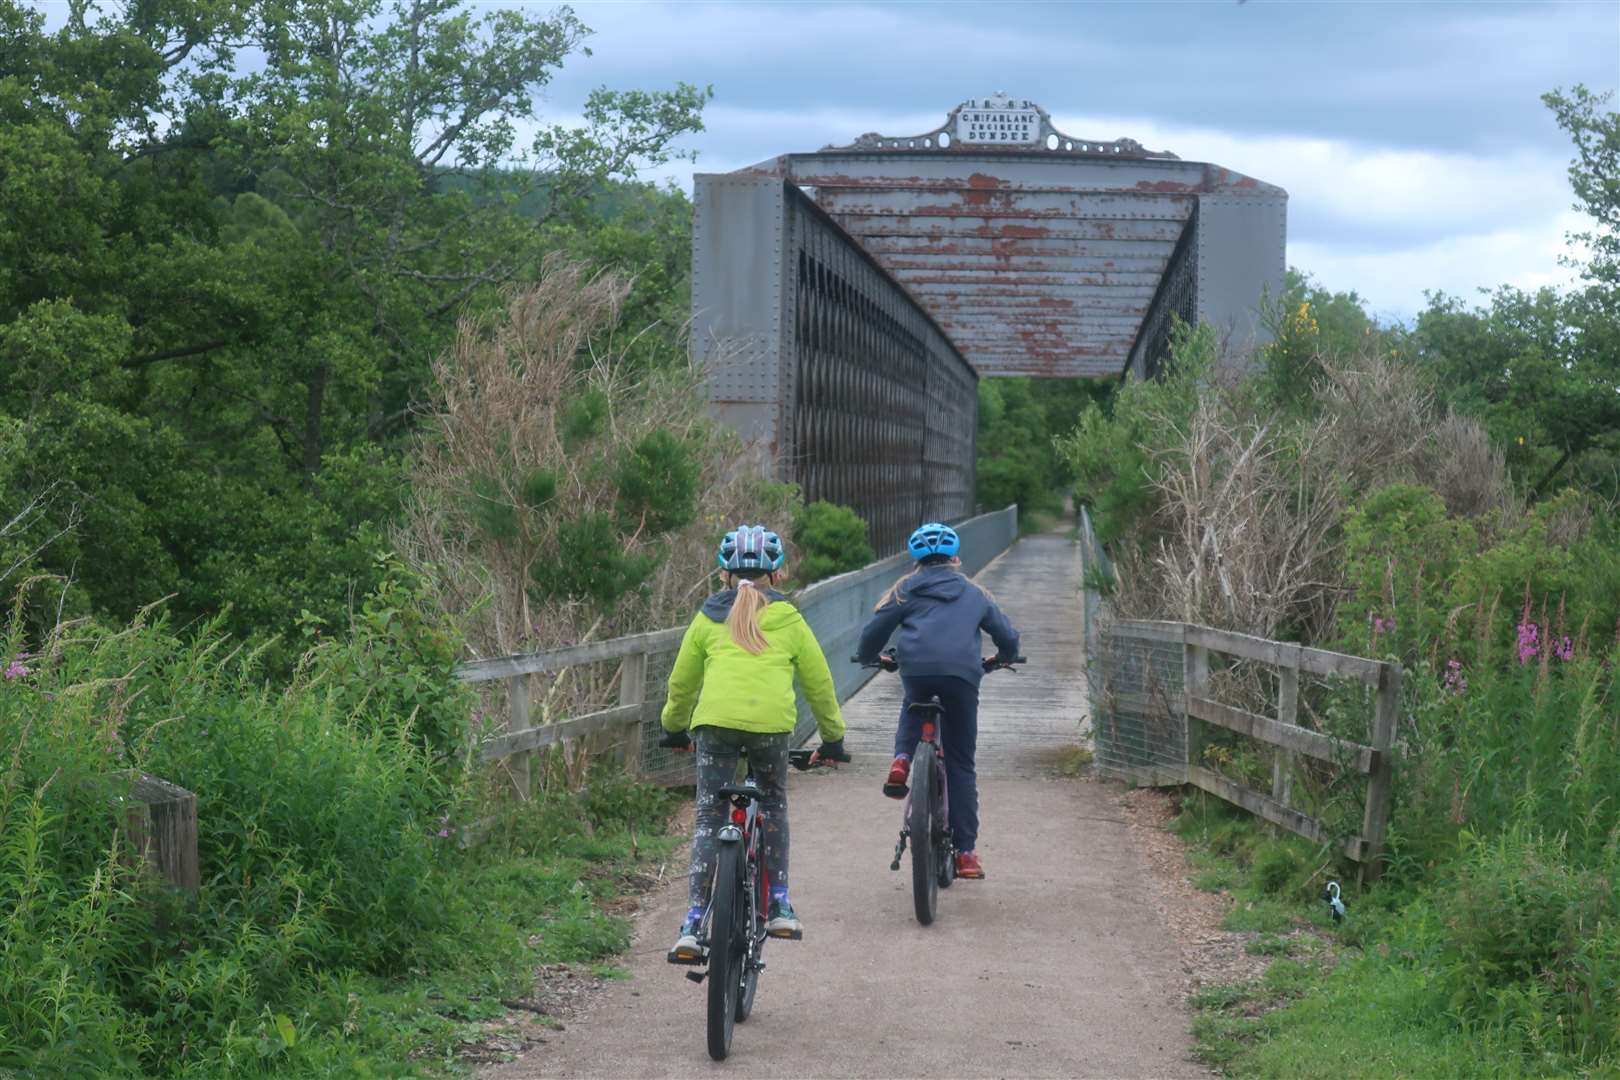 Cycling towards the Ballindalloch bridge on the Speyside Way.